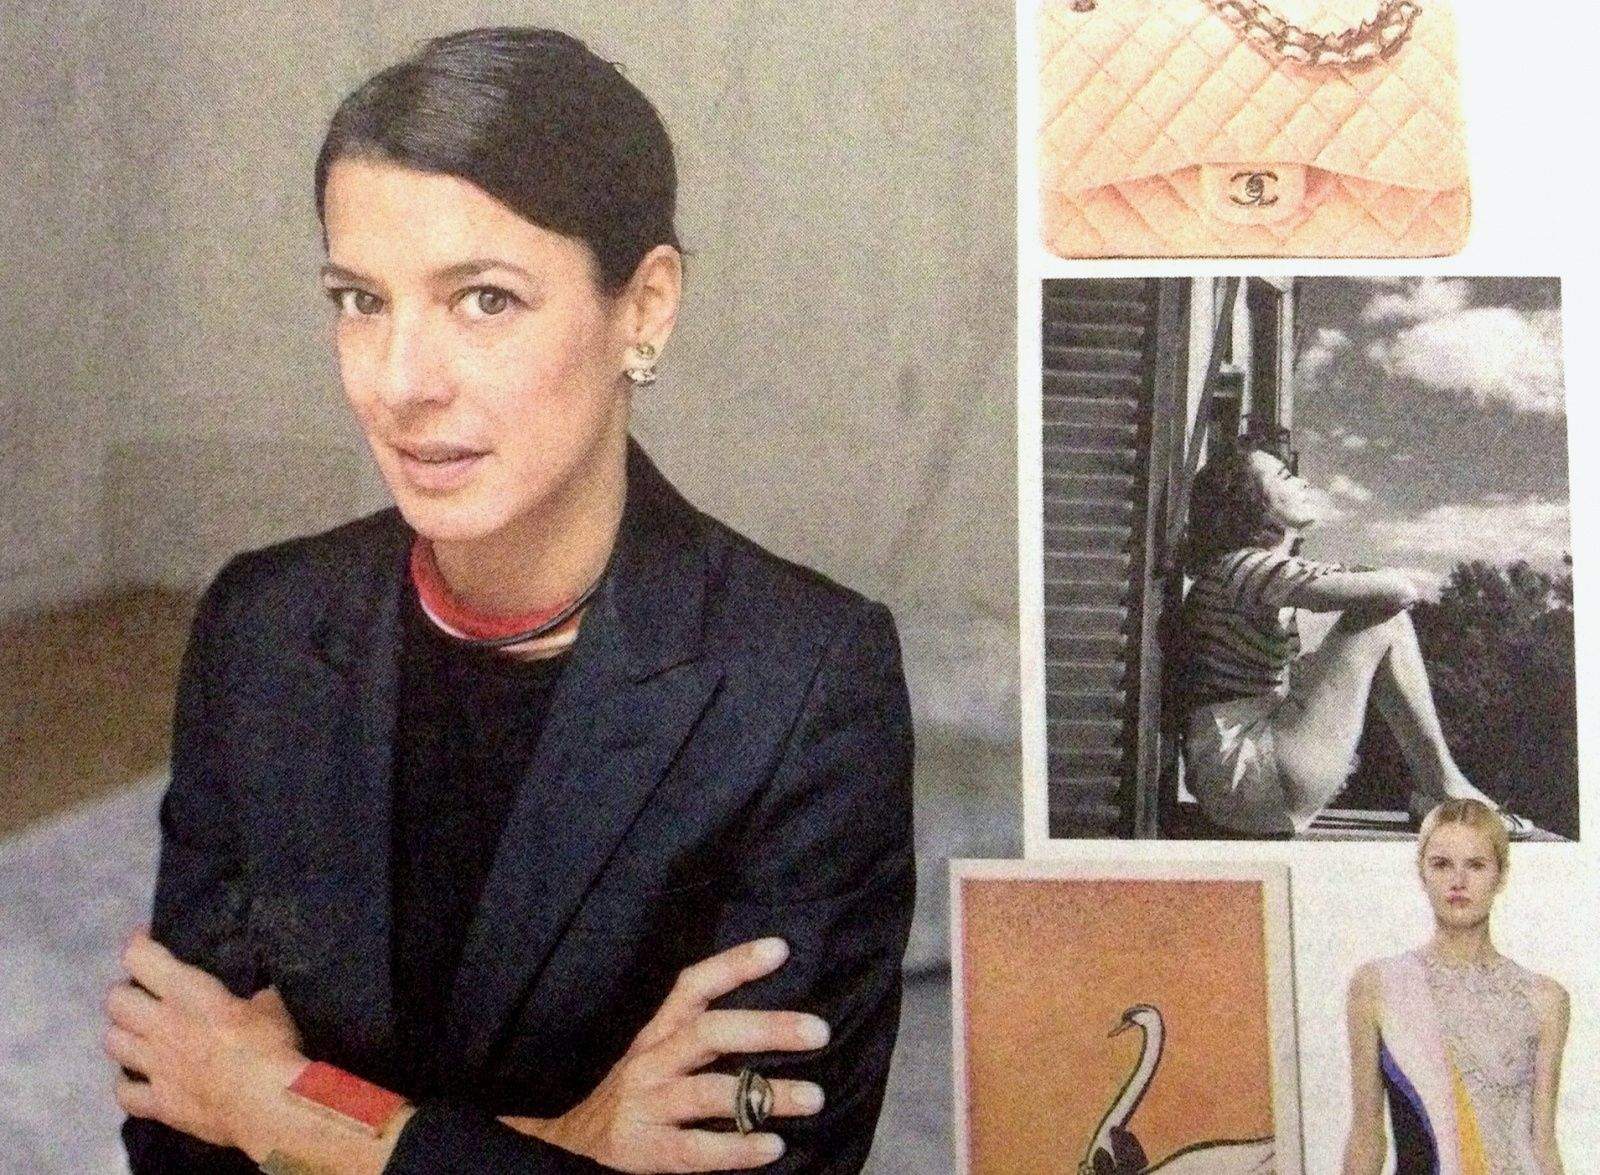 Dior designer Camille Miceli in the Wall Street Journal.